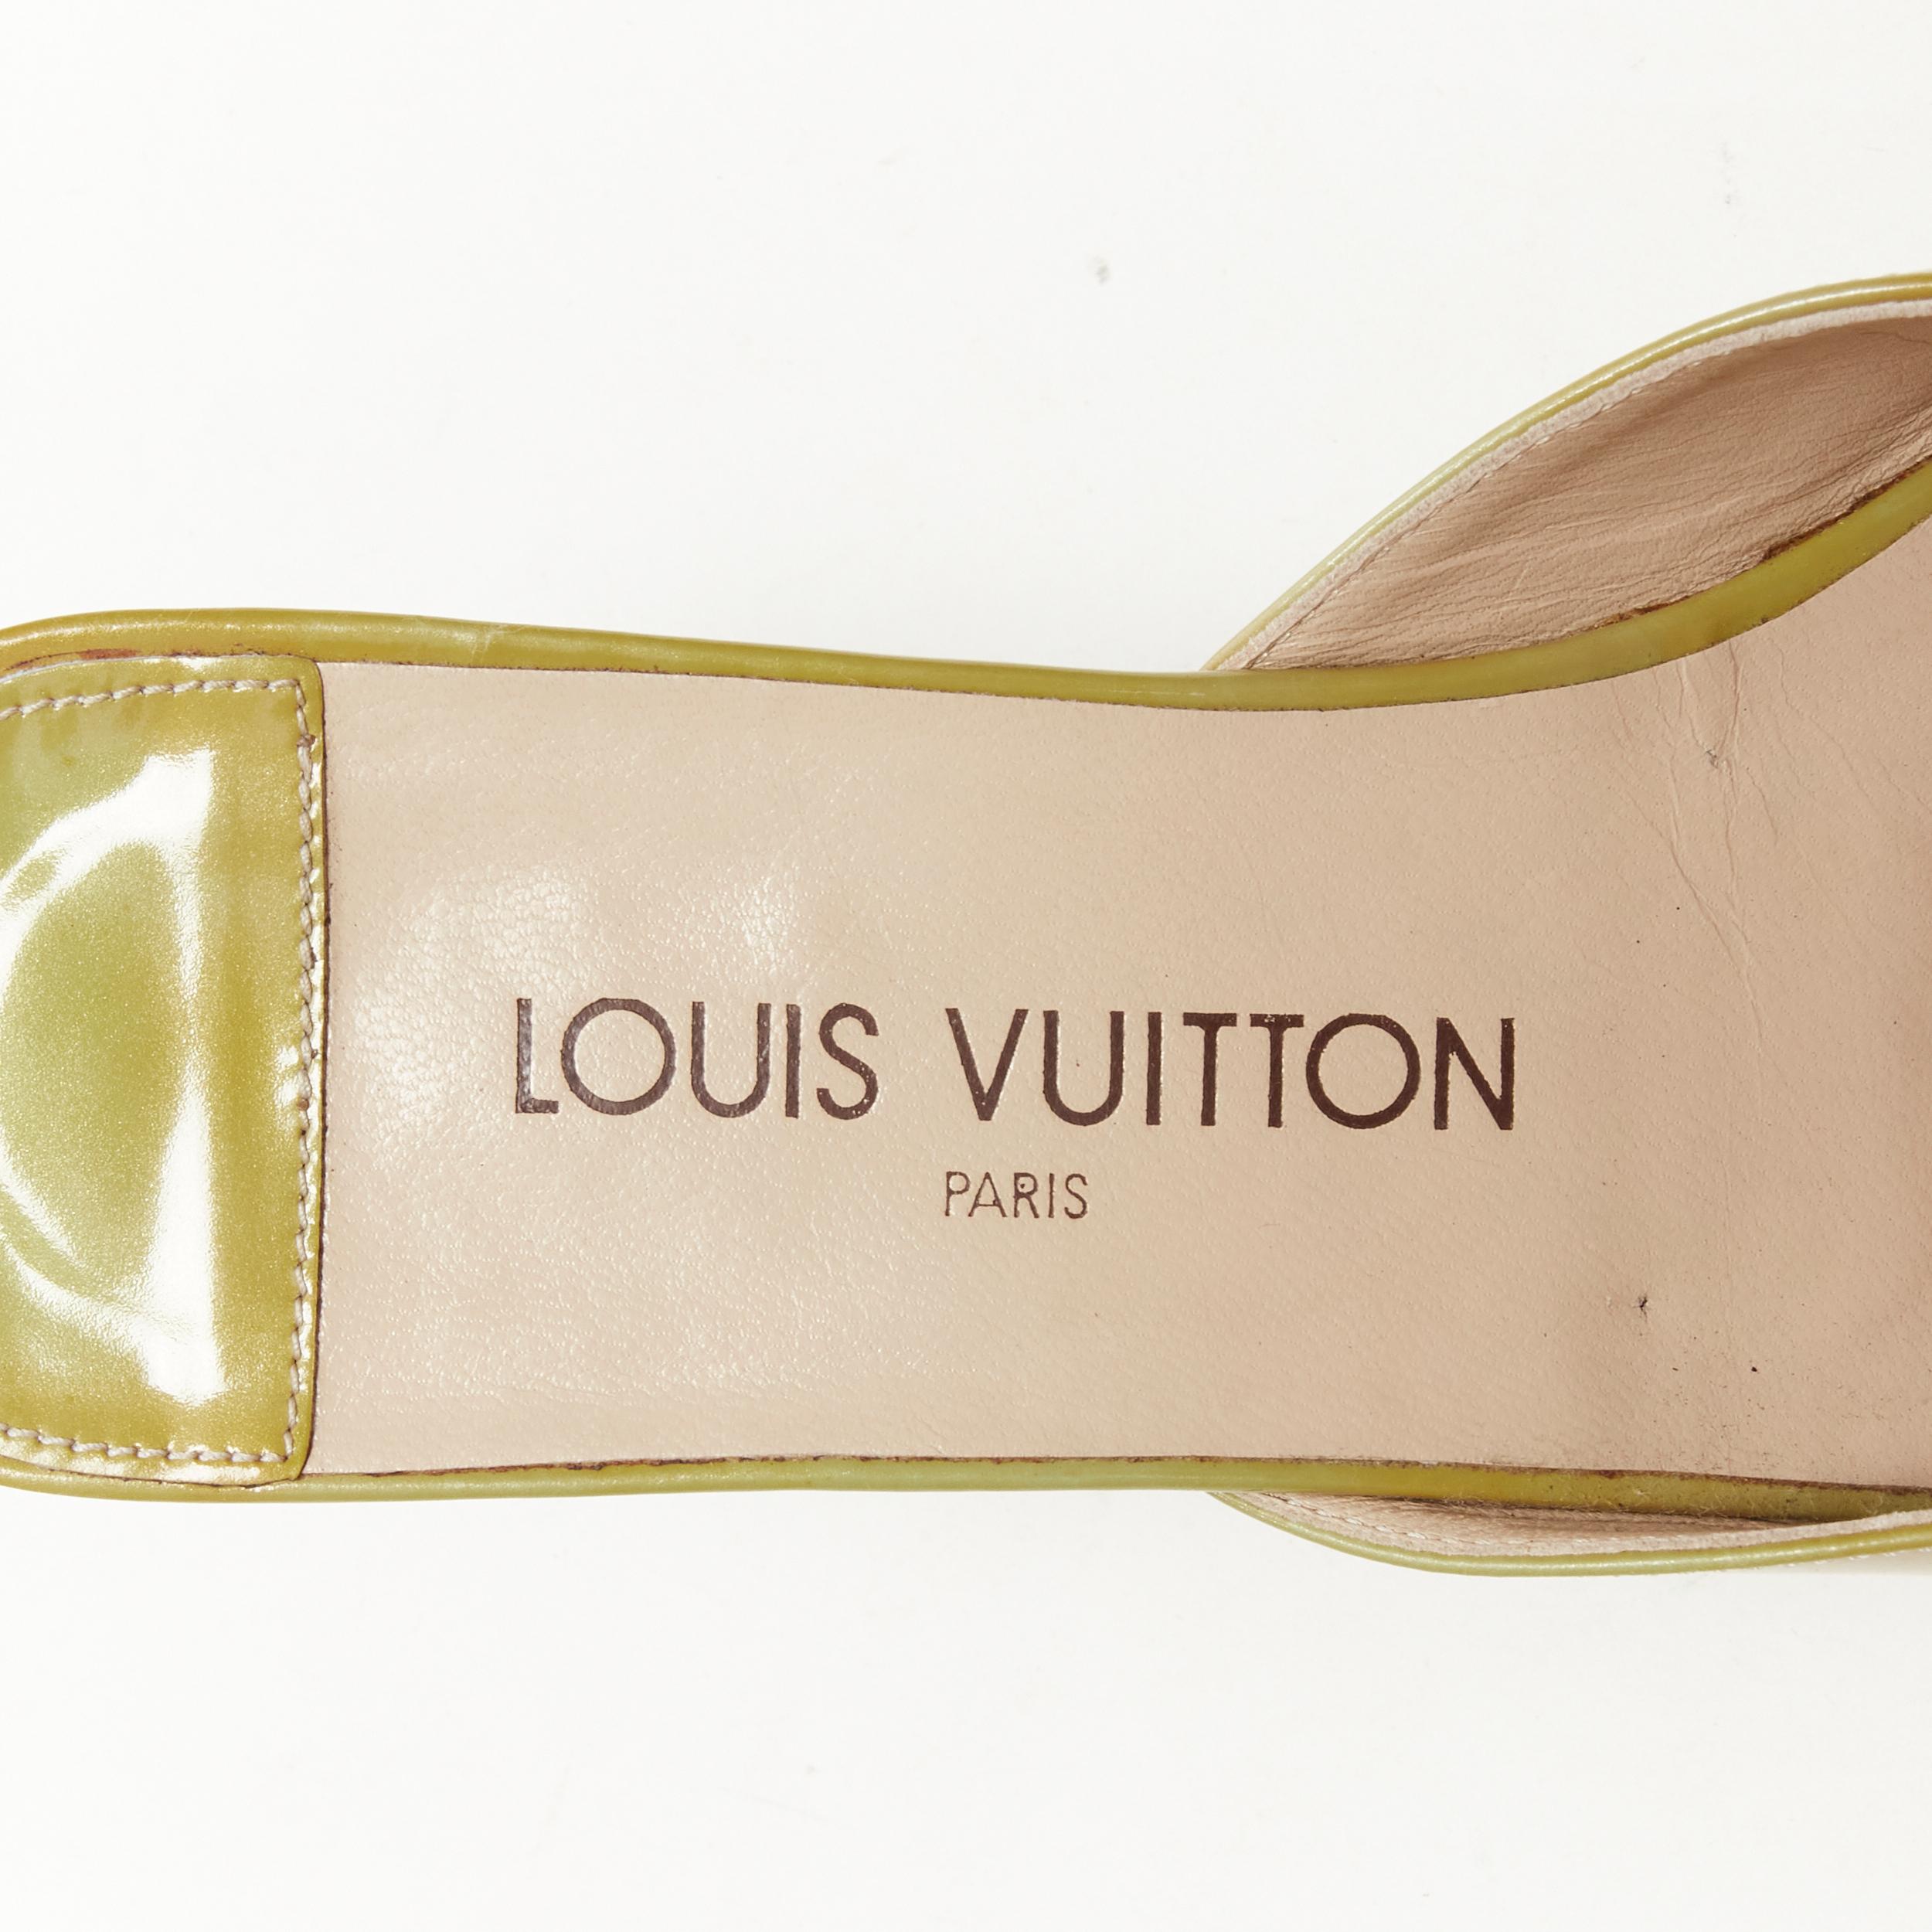 LOUIS VUITTON green yellow polished leather LV dice square toe slipper EU37 For Sale 1